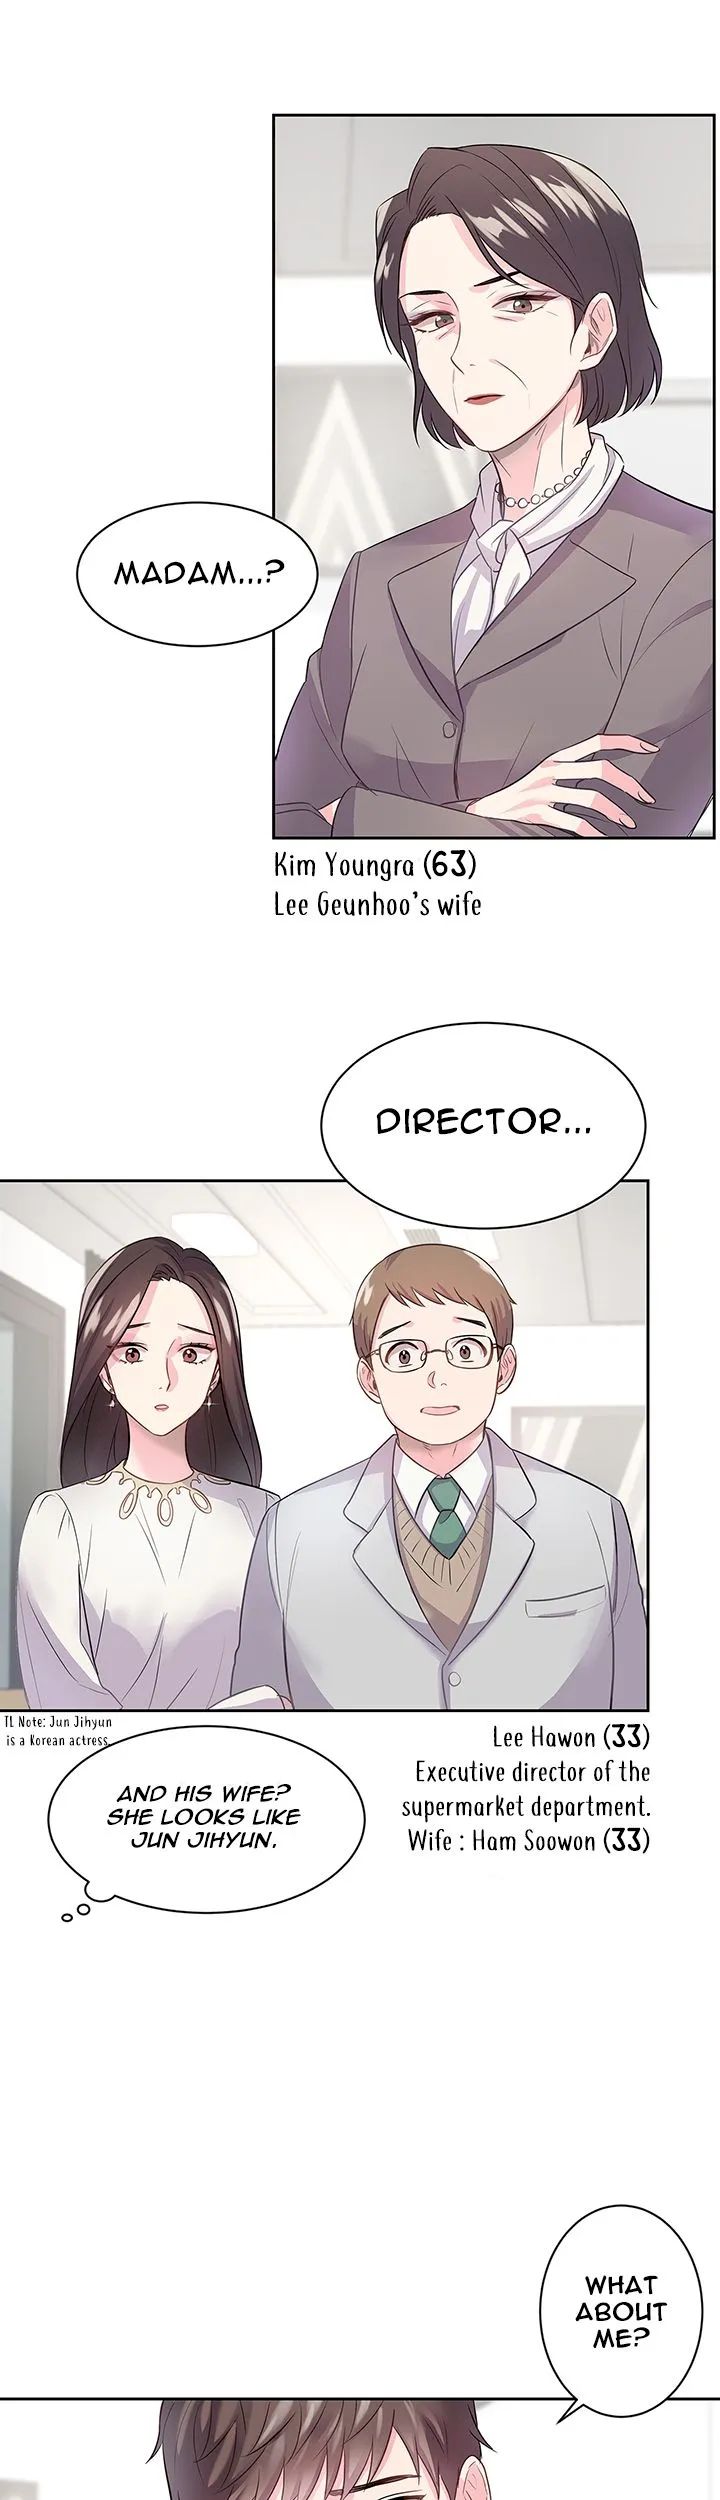 I Became a Millionaire’s daughter - Chapter 1 Page 4